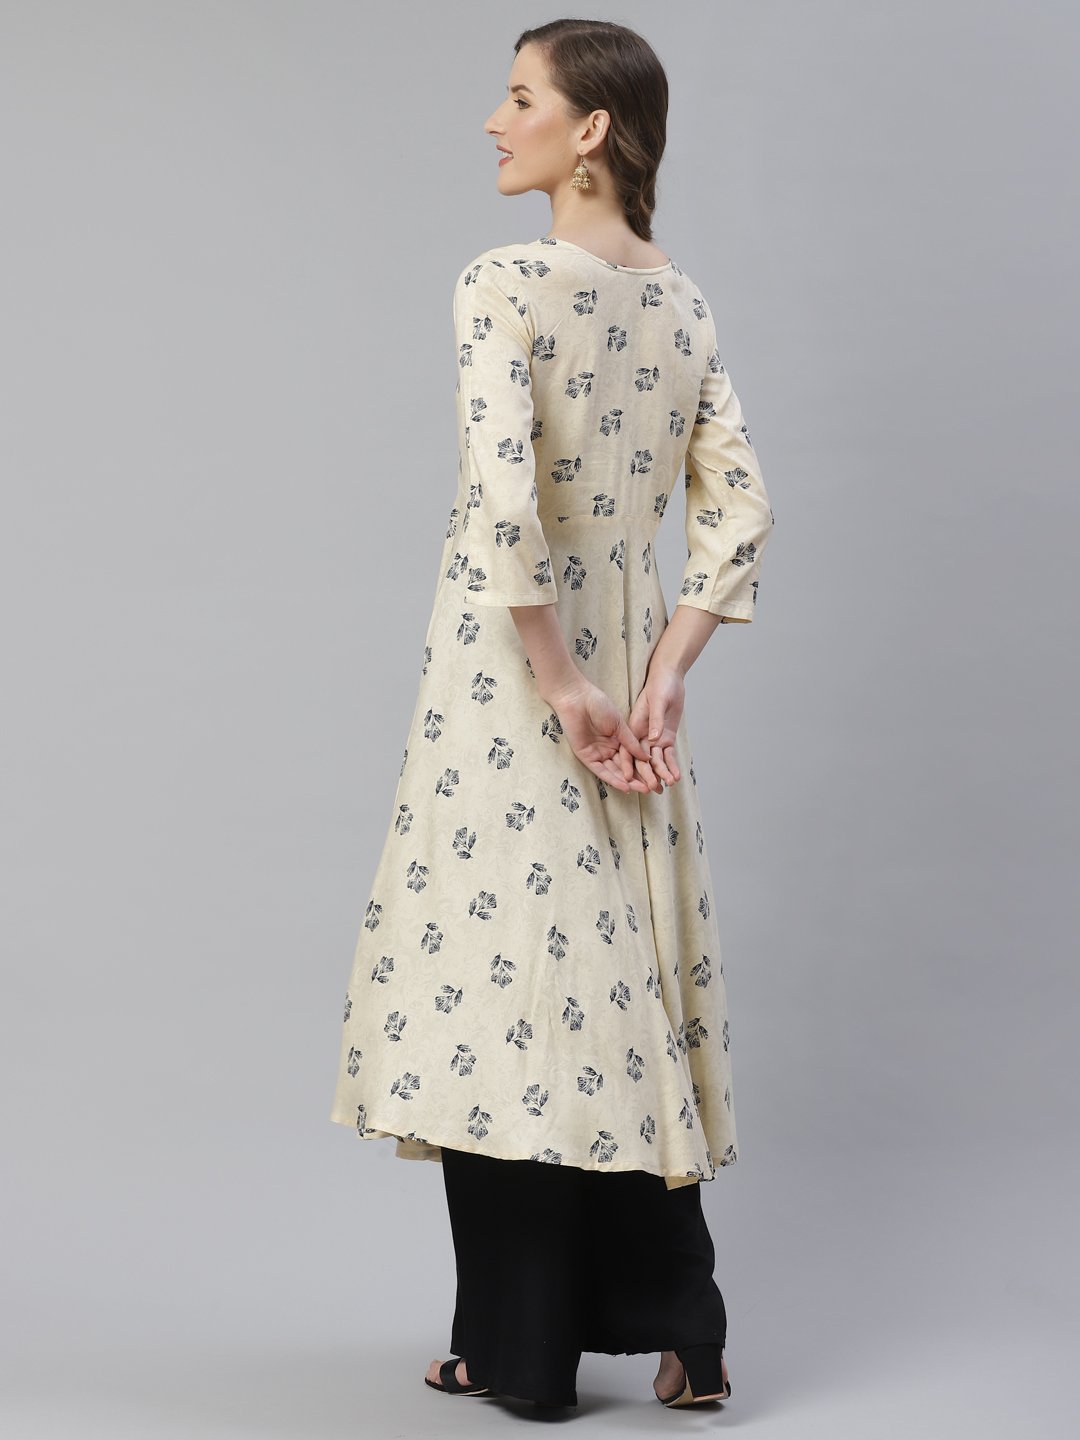 Women's Off White & Black Floral Printed A Line Kurta - Jompers